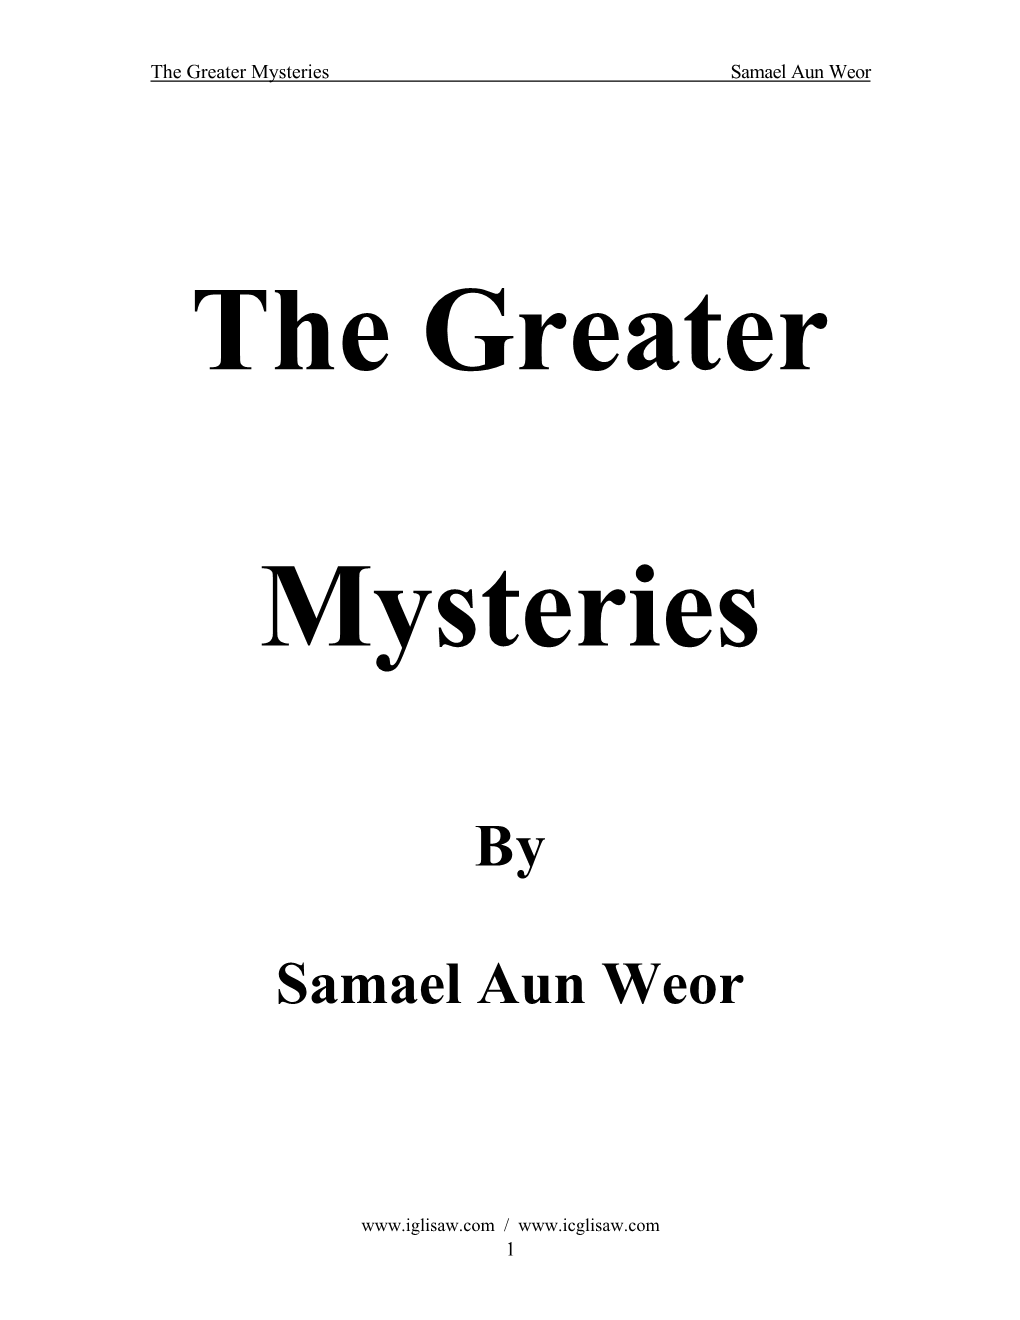 The Greater Mysteries by Samael Aun Weor